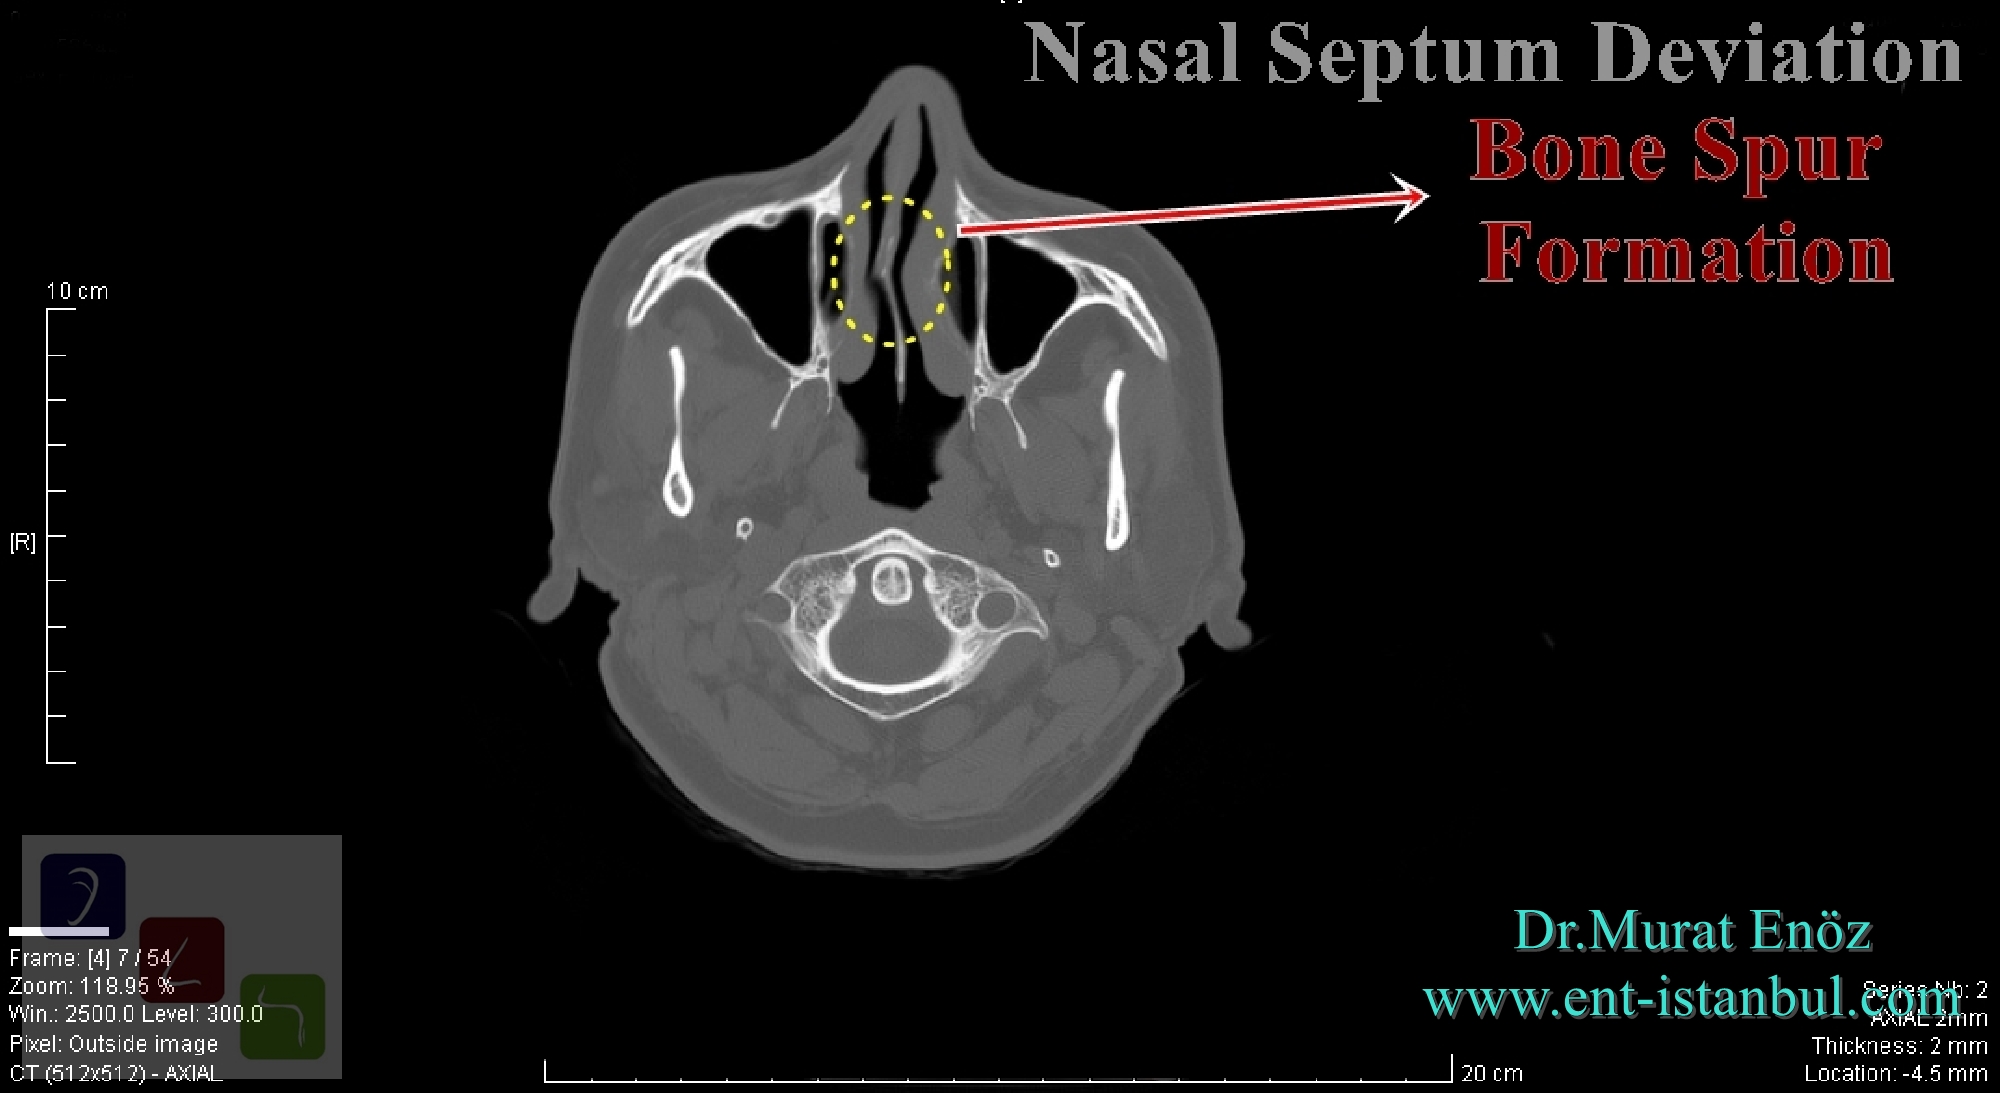 Treatment of Deviated Nasal Septum and Health Effects